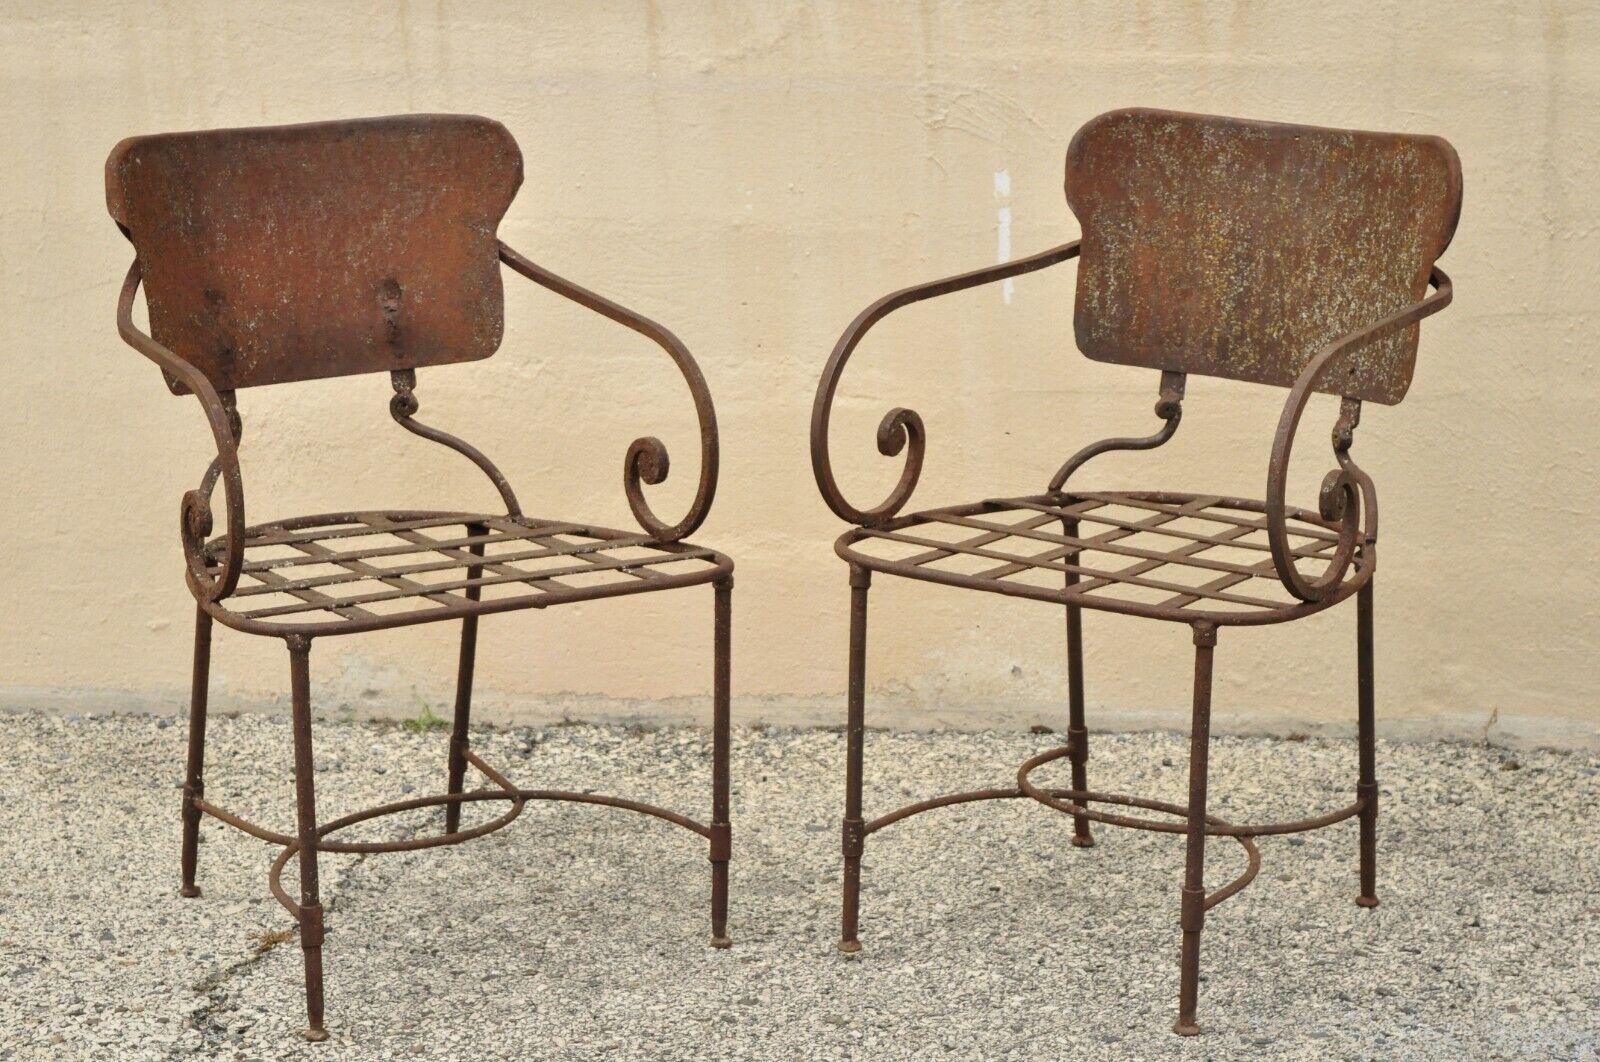 Antique Neoclassical Wrought Iron Outdoor Garden Scrolling Arm Chairs, a Pair 5